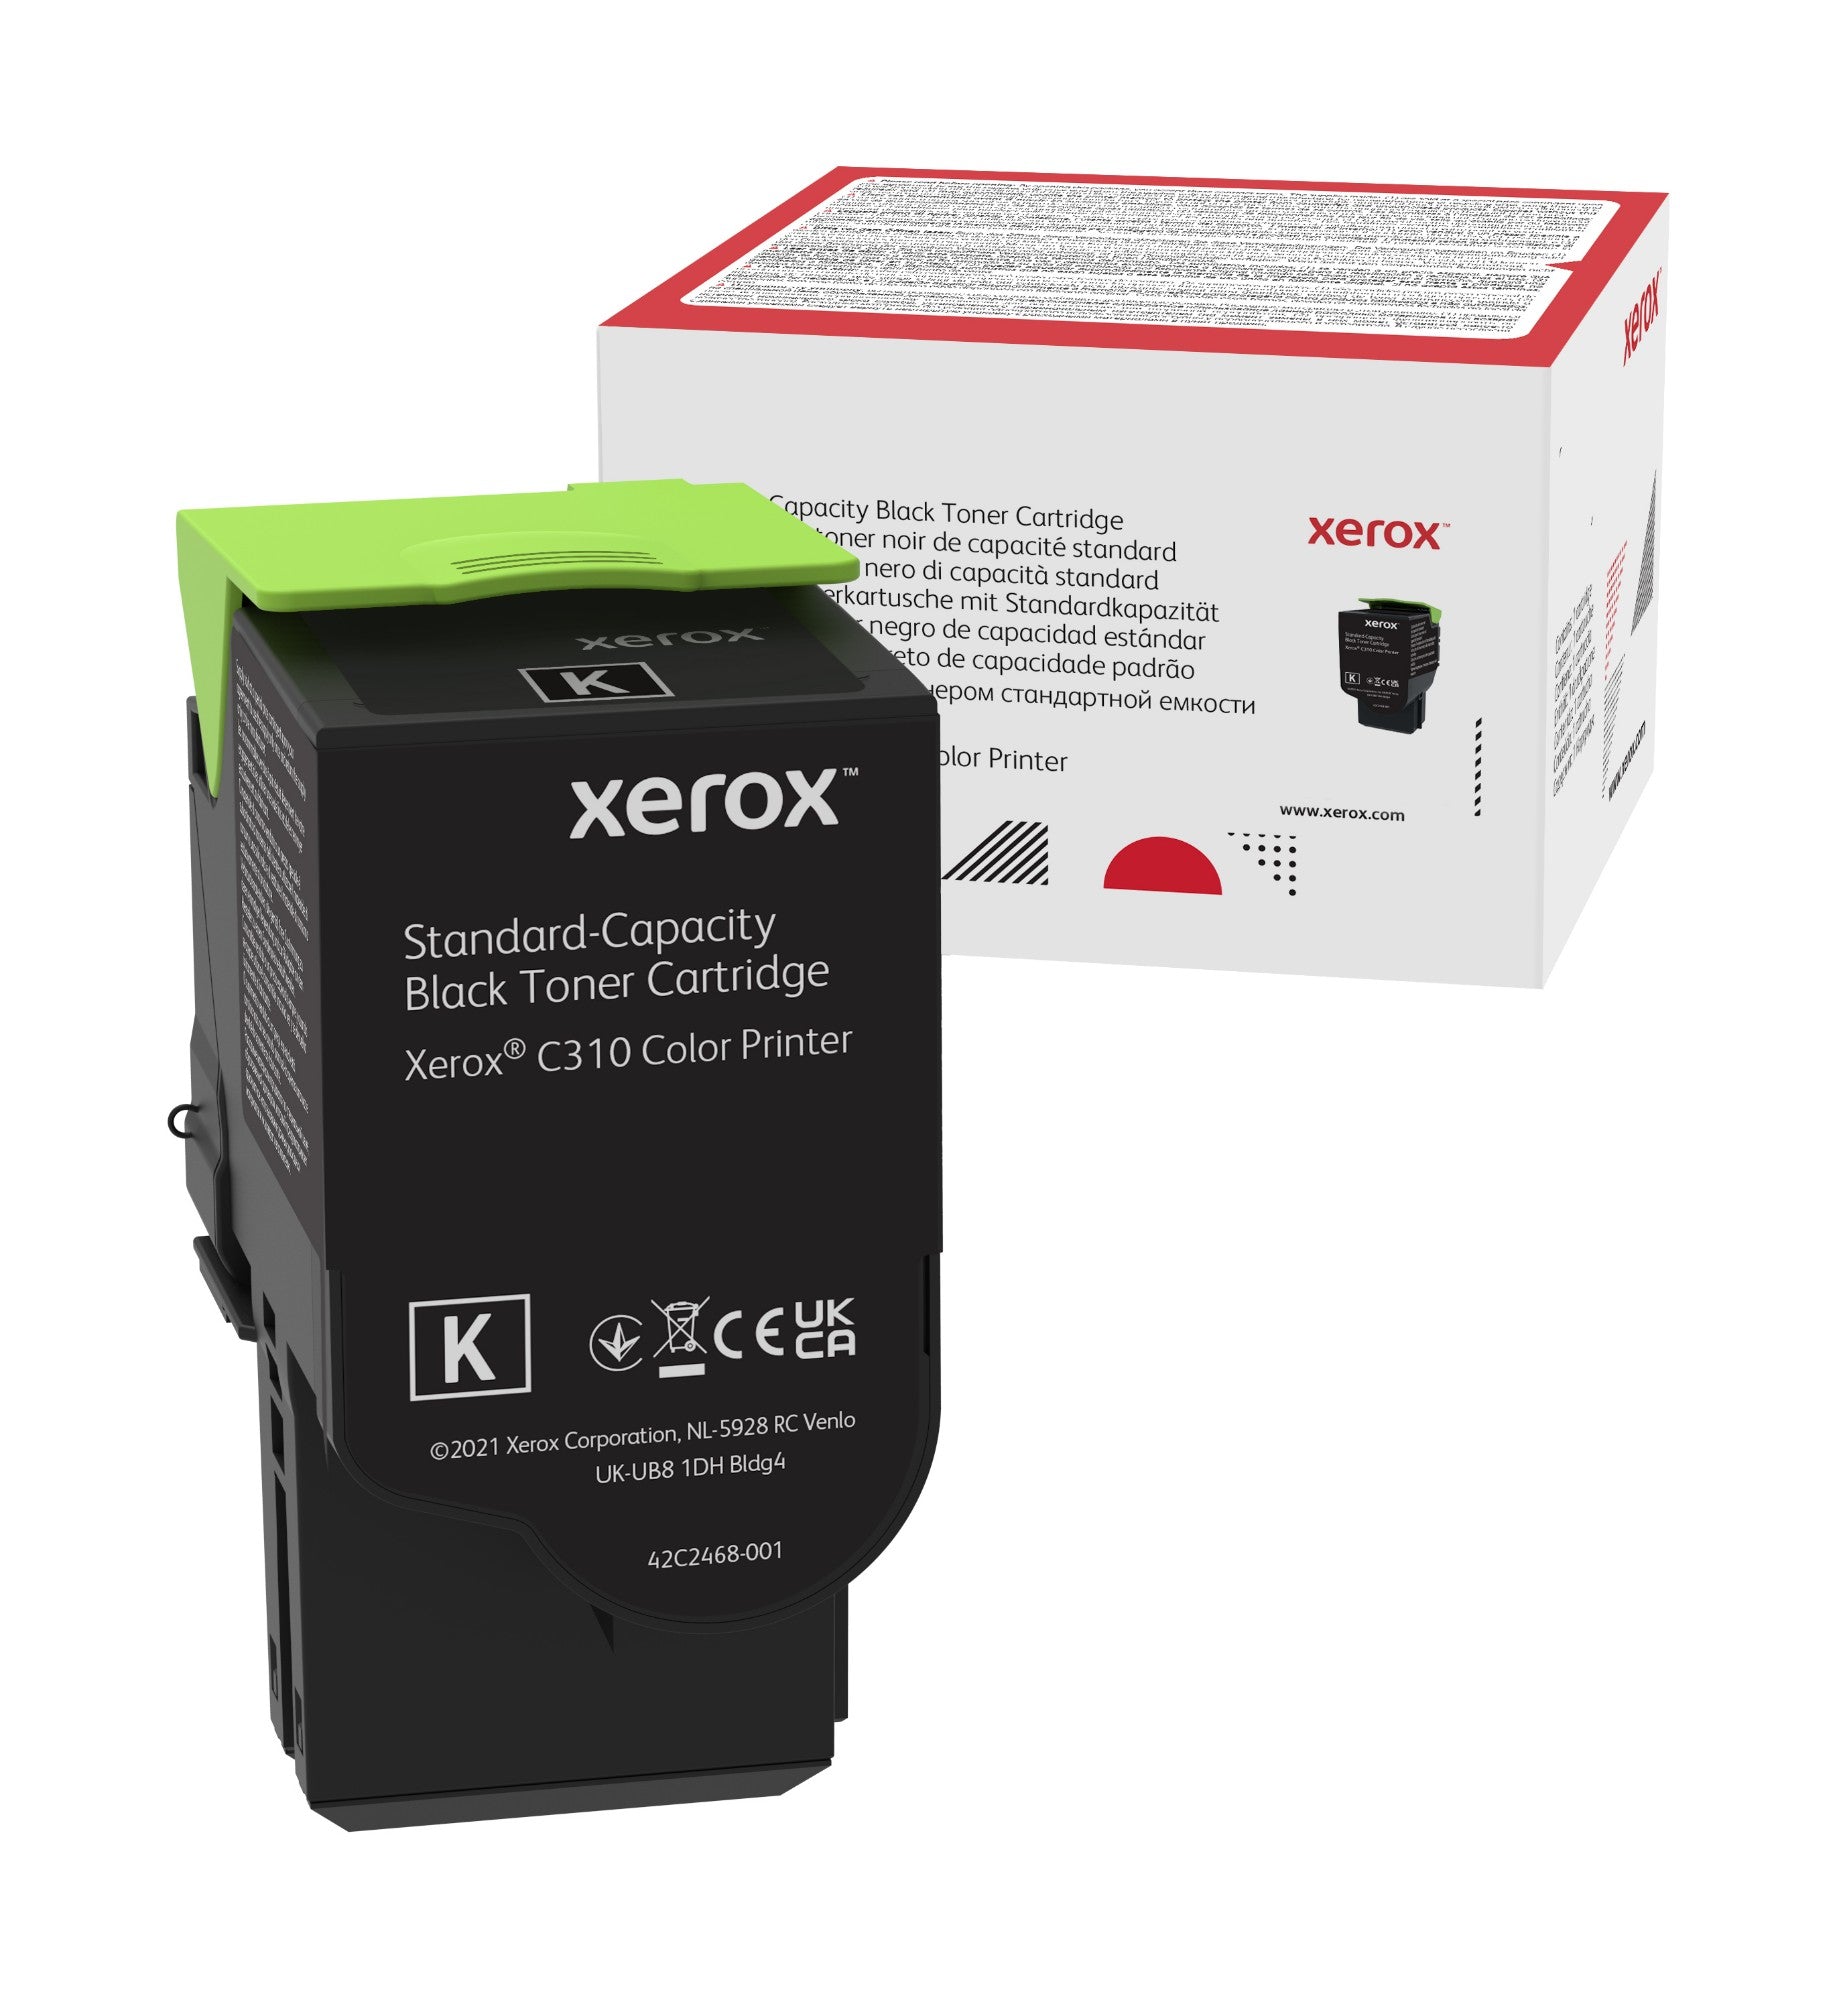 Xerox 006R04356 Toner-kit black, 3K pages ISO/IEC 19752 for Xerox C 310